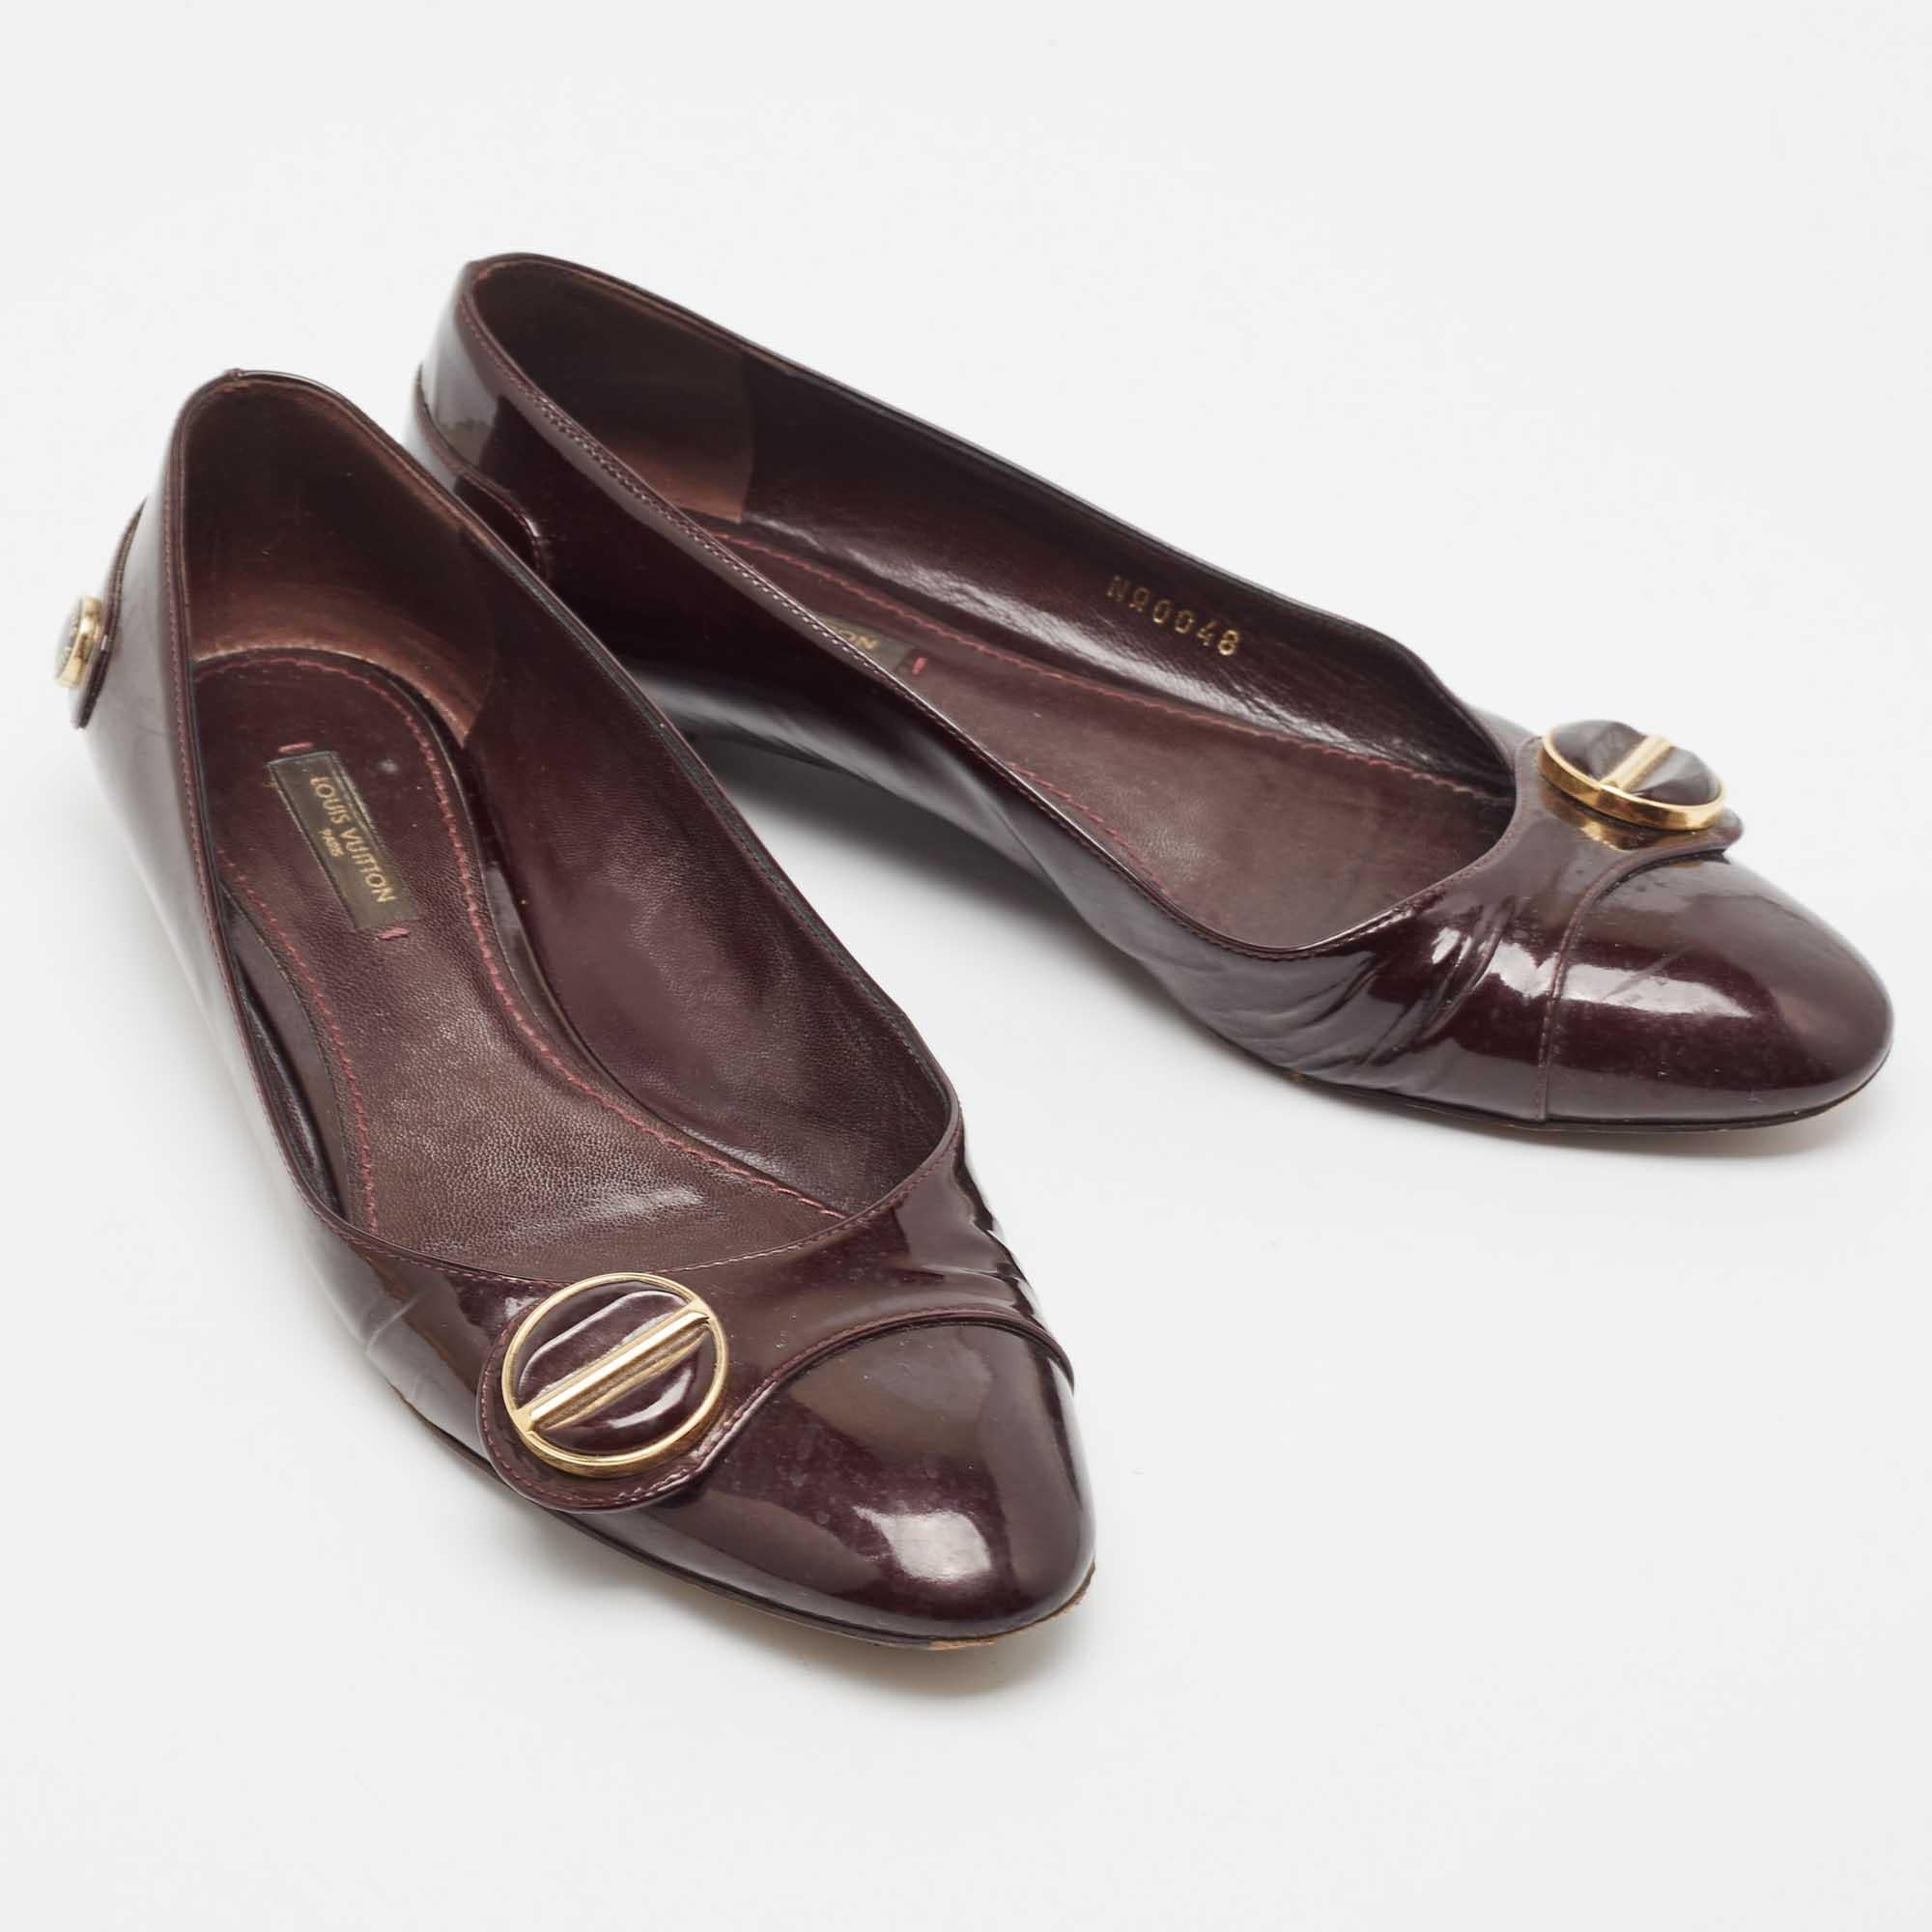 Complete your look by adding these designer ballet flats to your lovely wardrobe. They are crafted skilfully to grant the perfect fit and style.

